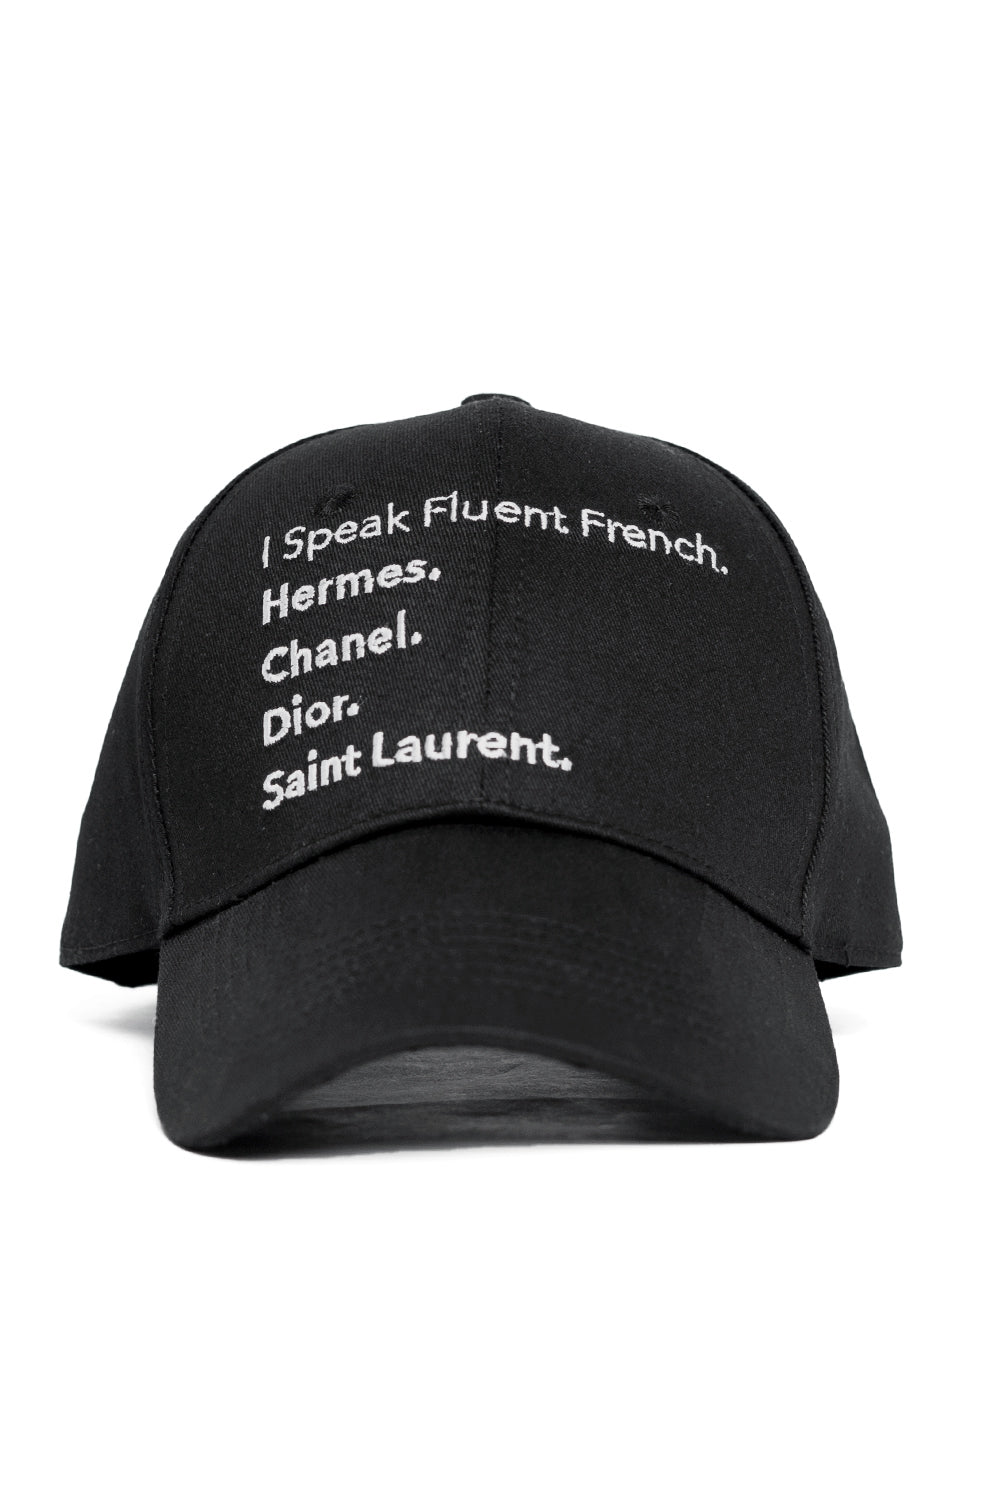 ball cap - french